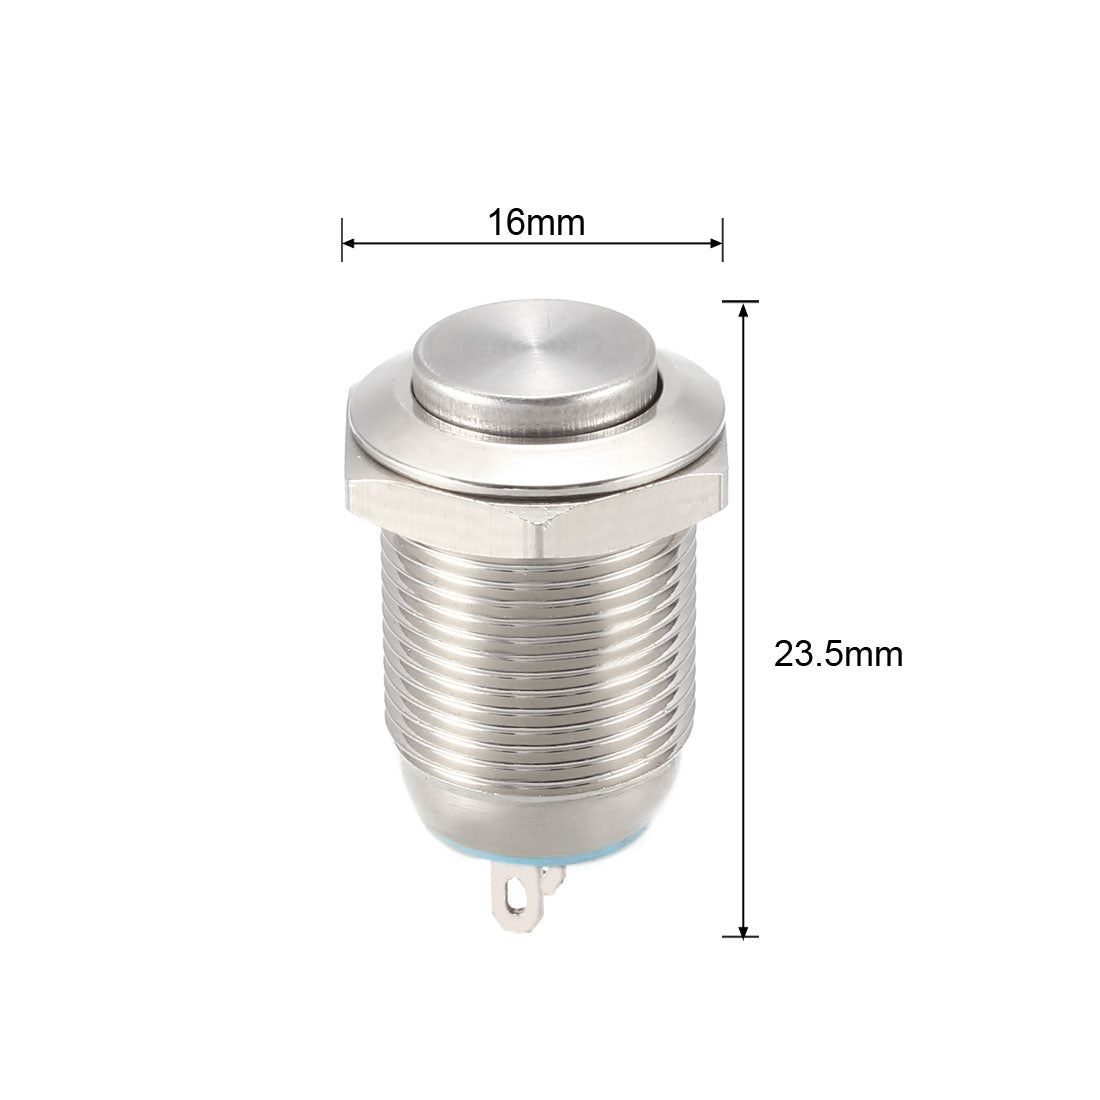 uxcell Uxcell Latching Metal Push Button Switch 12mm Mounting Dia 1NO 1NC COM DC 30V 0.1A 23.5 x 16mm